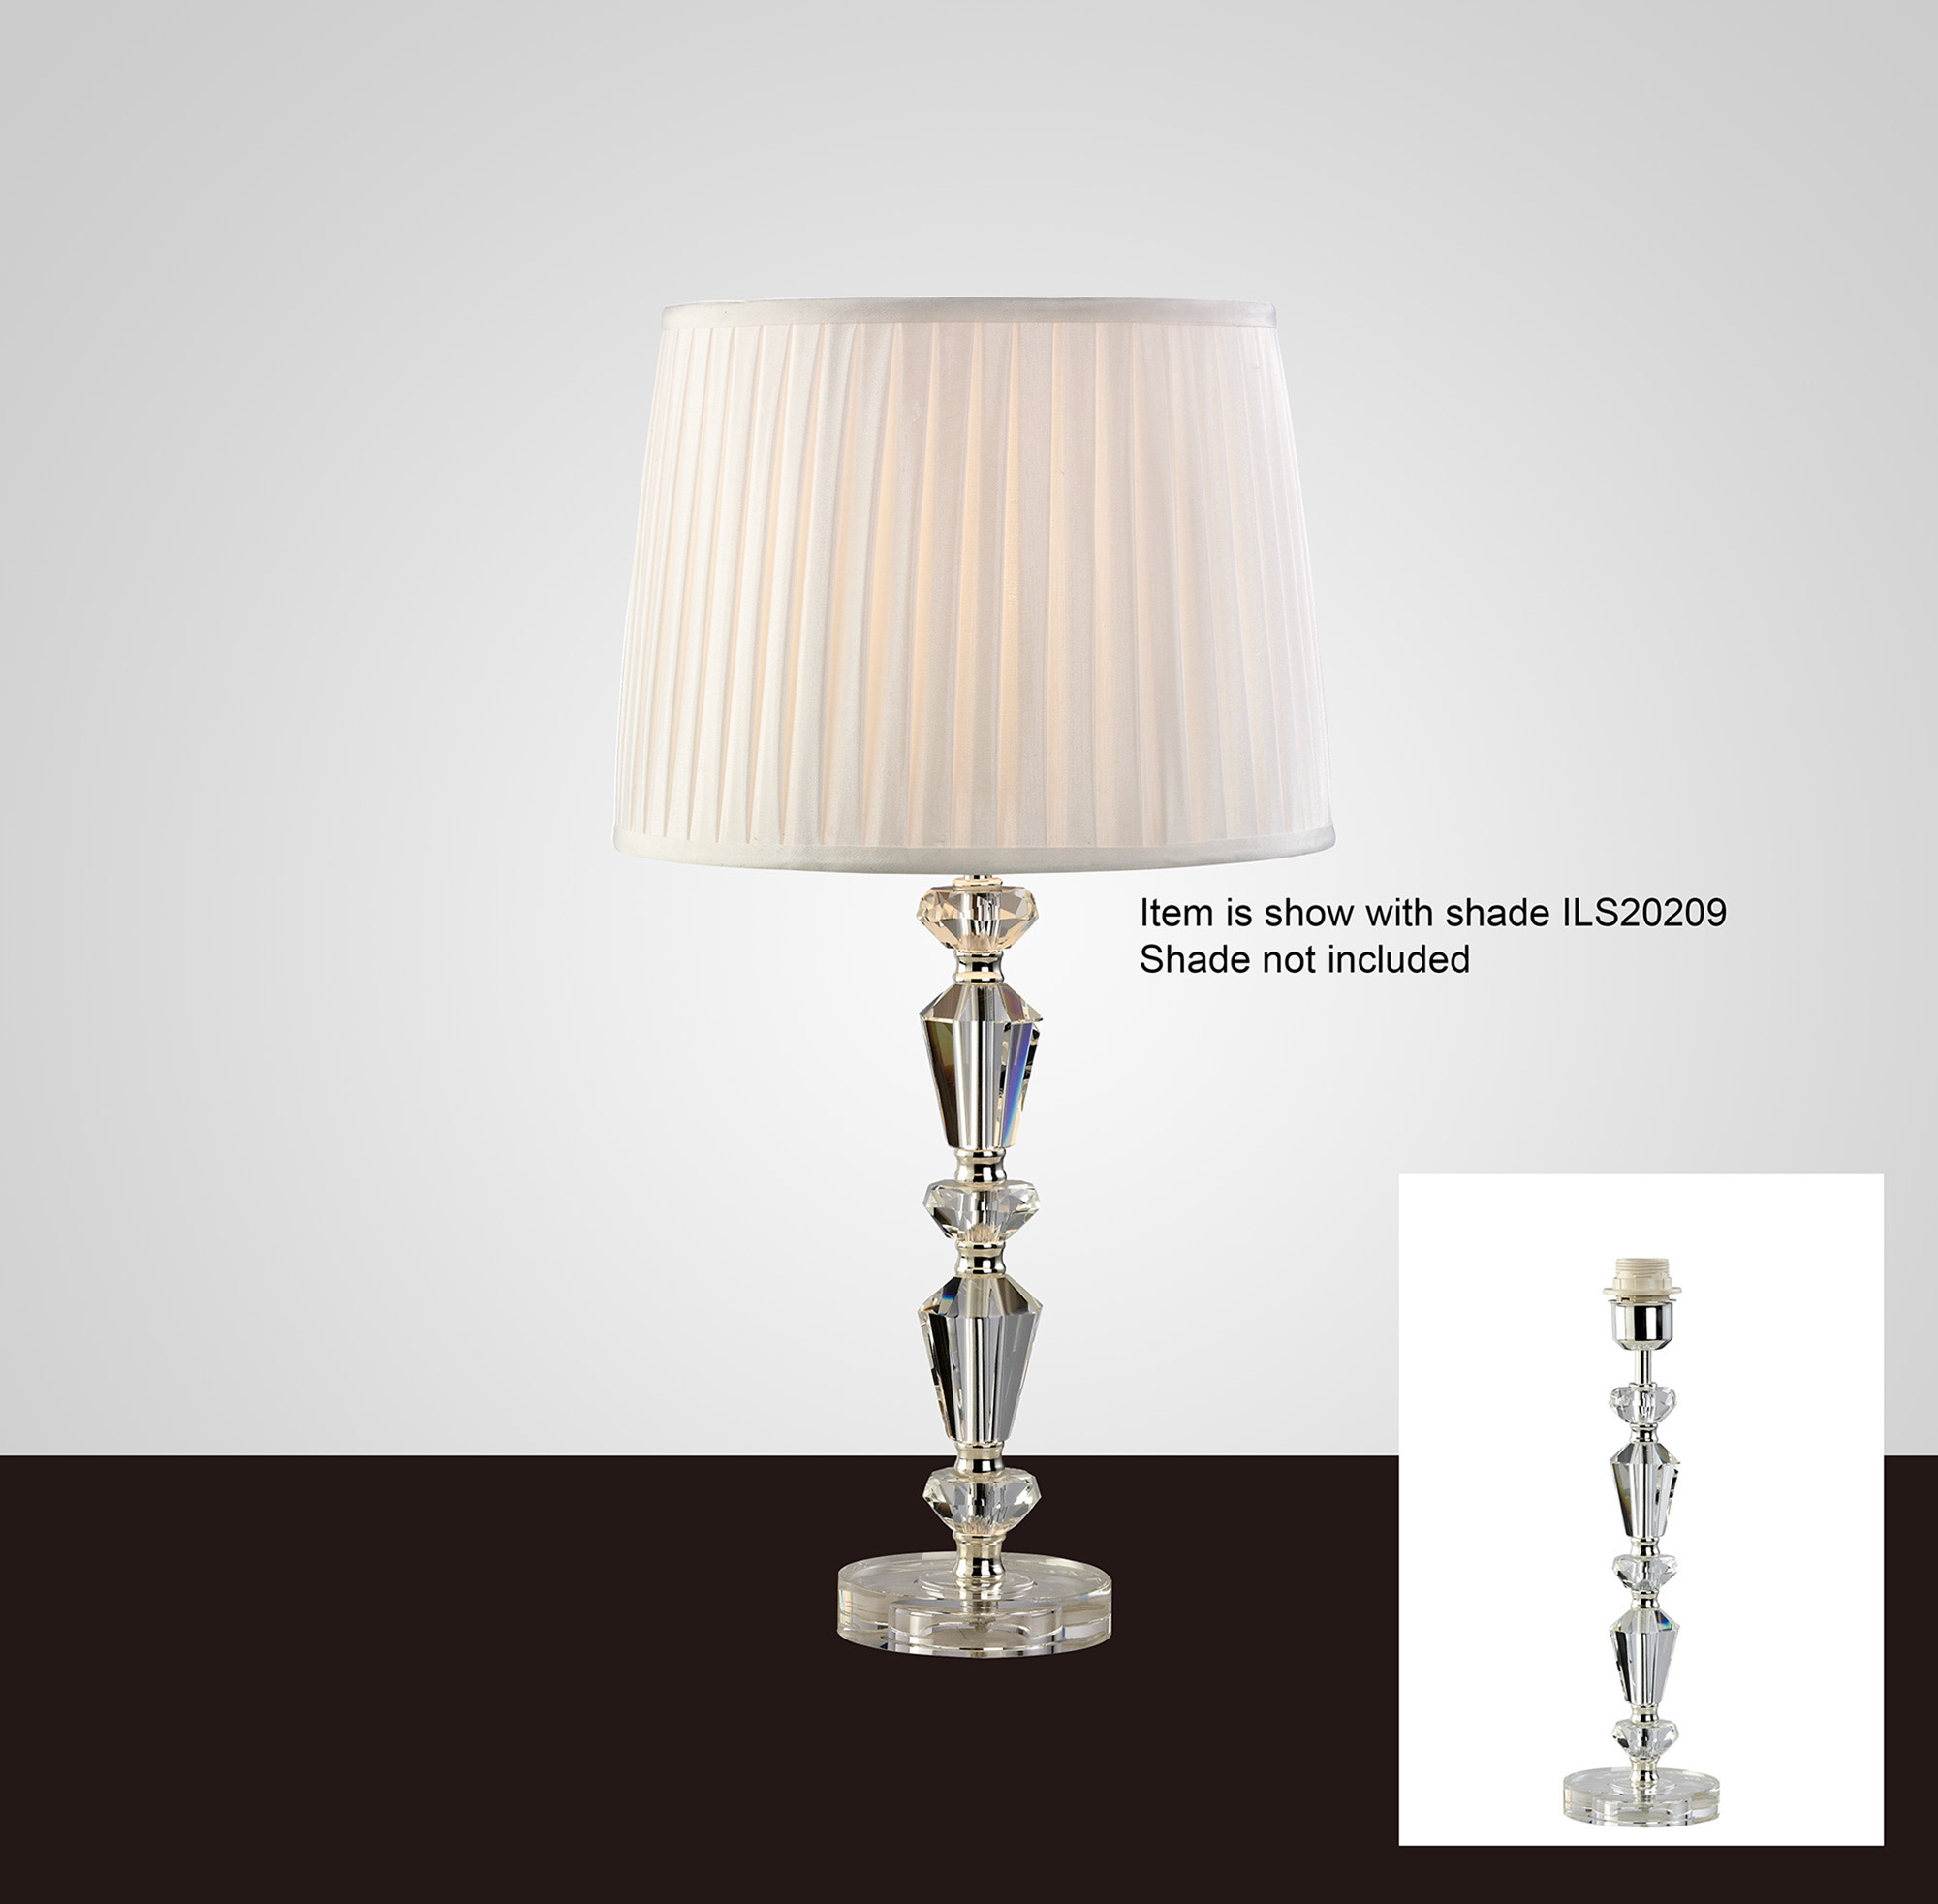 IL11026  Renee Crystal 41.5cm 1 Light Table Lamp Without Shade